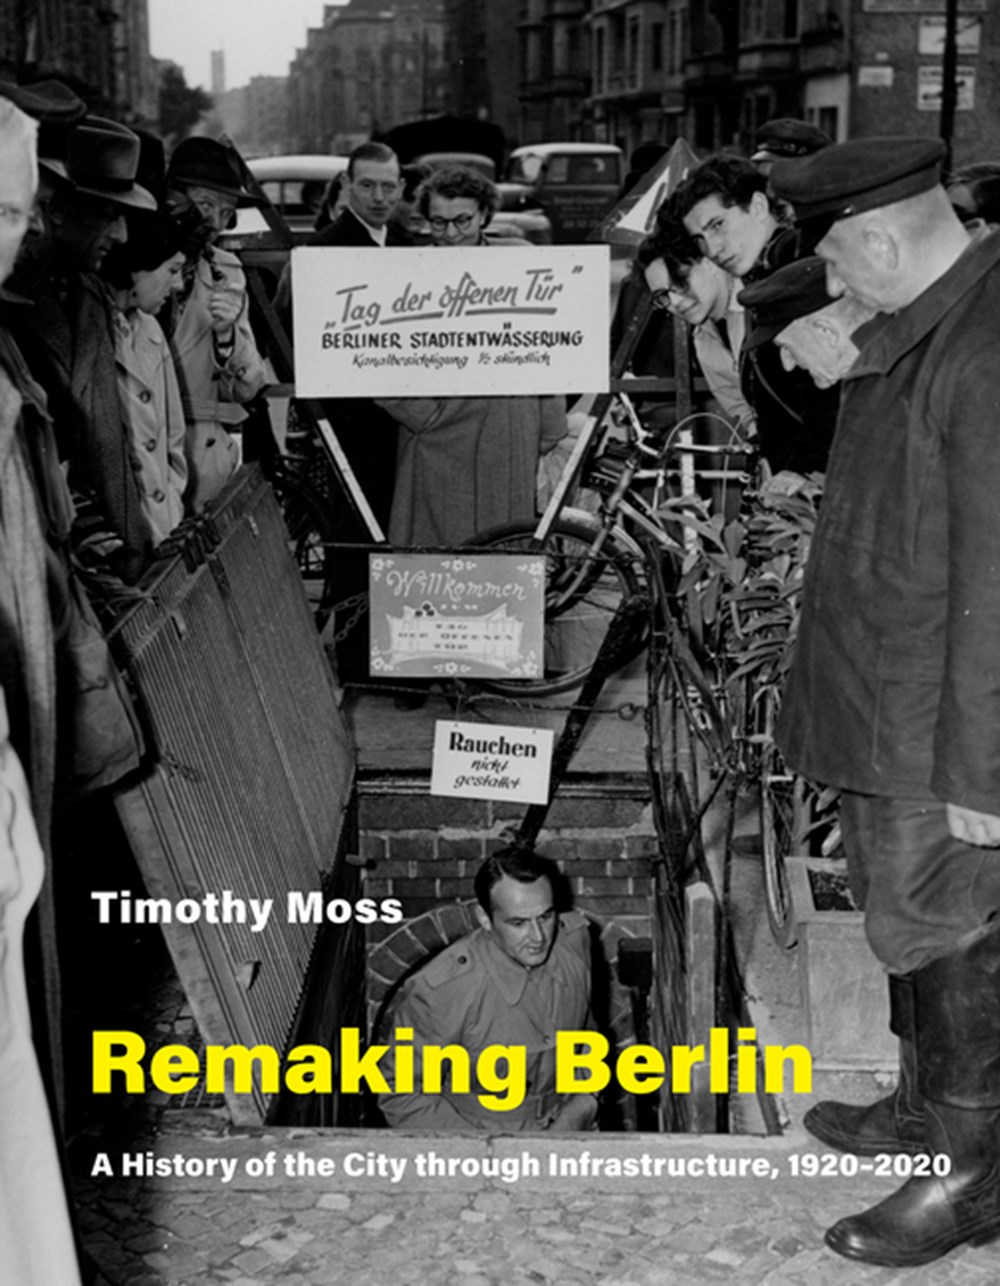 Remaking Berlin: A History of the City Through Infrastructure, 1920-2020